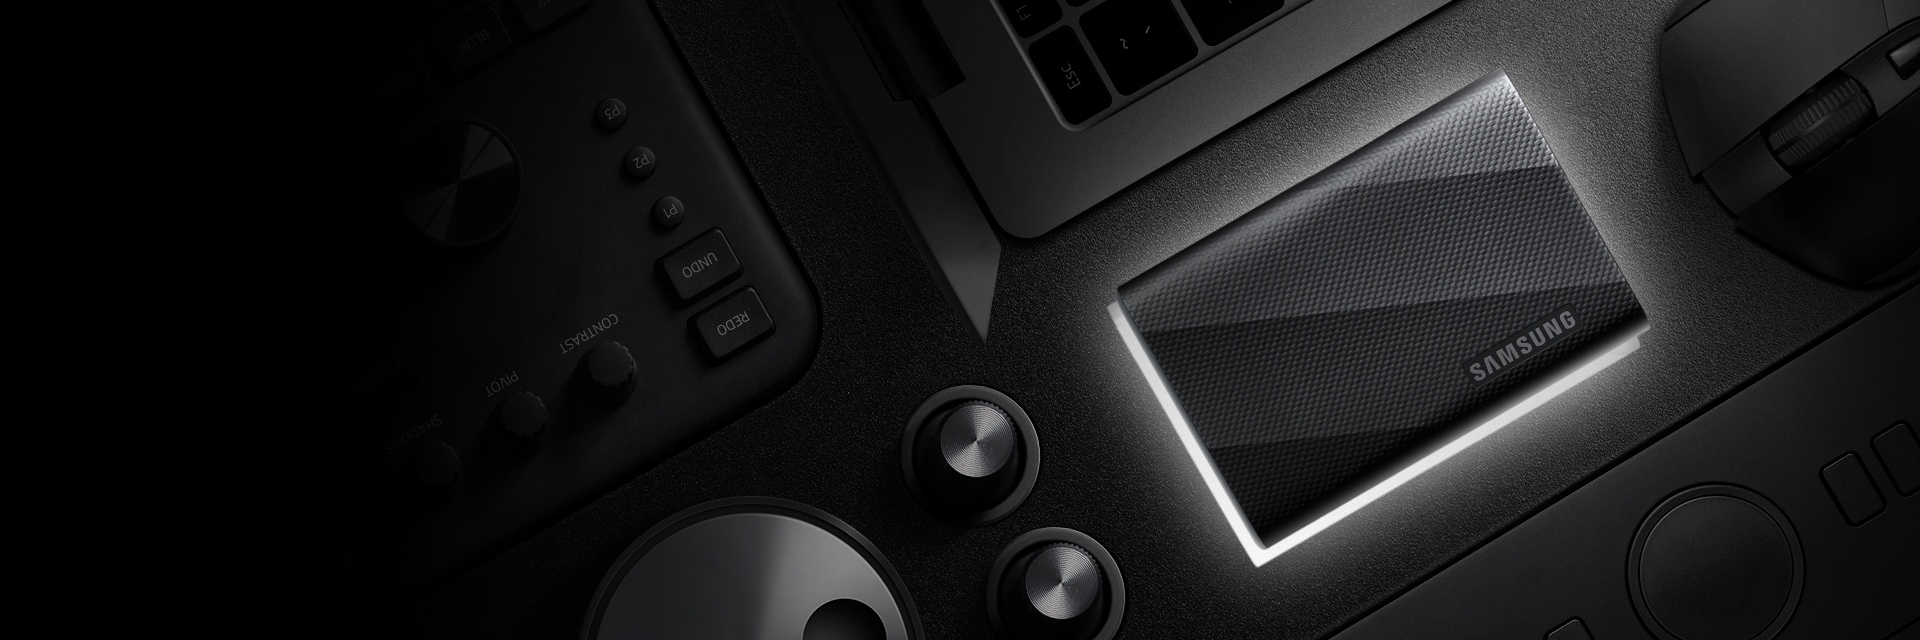 The T9 is a portable SSD device.